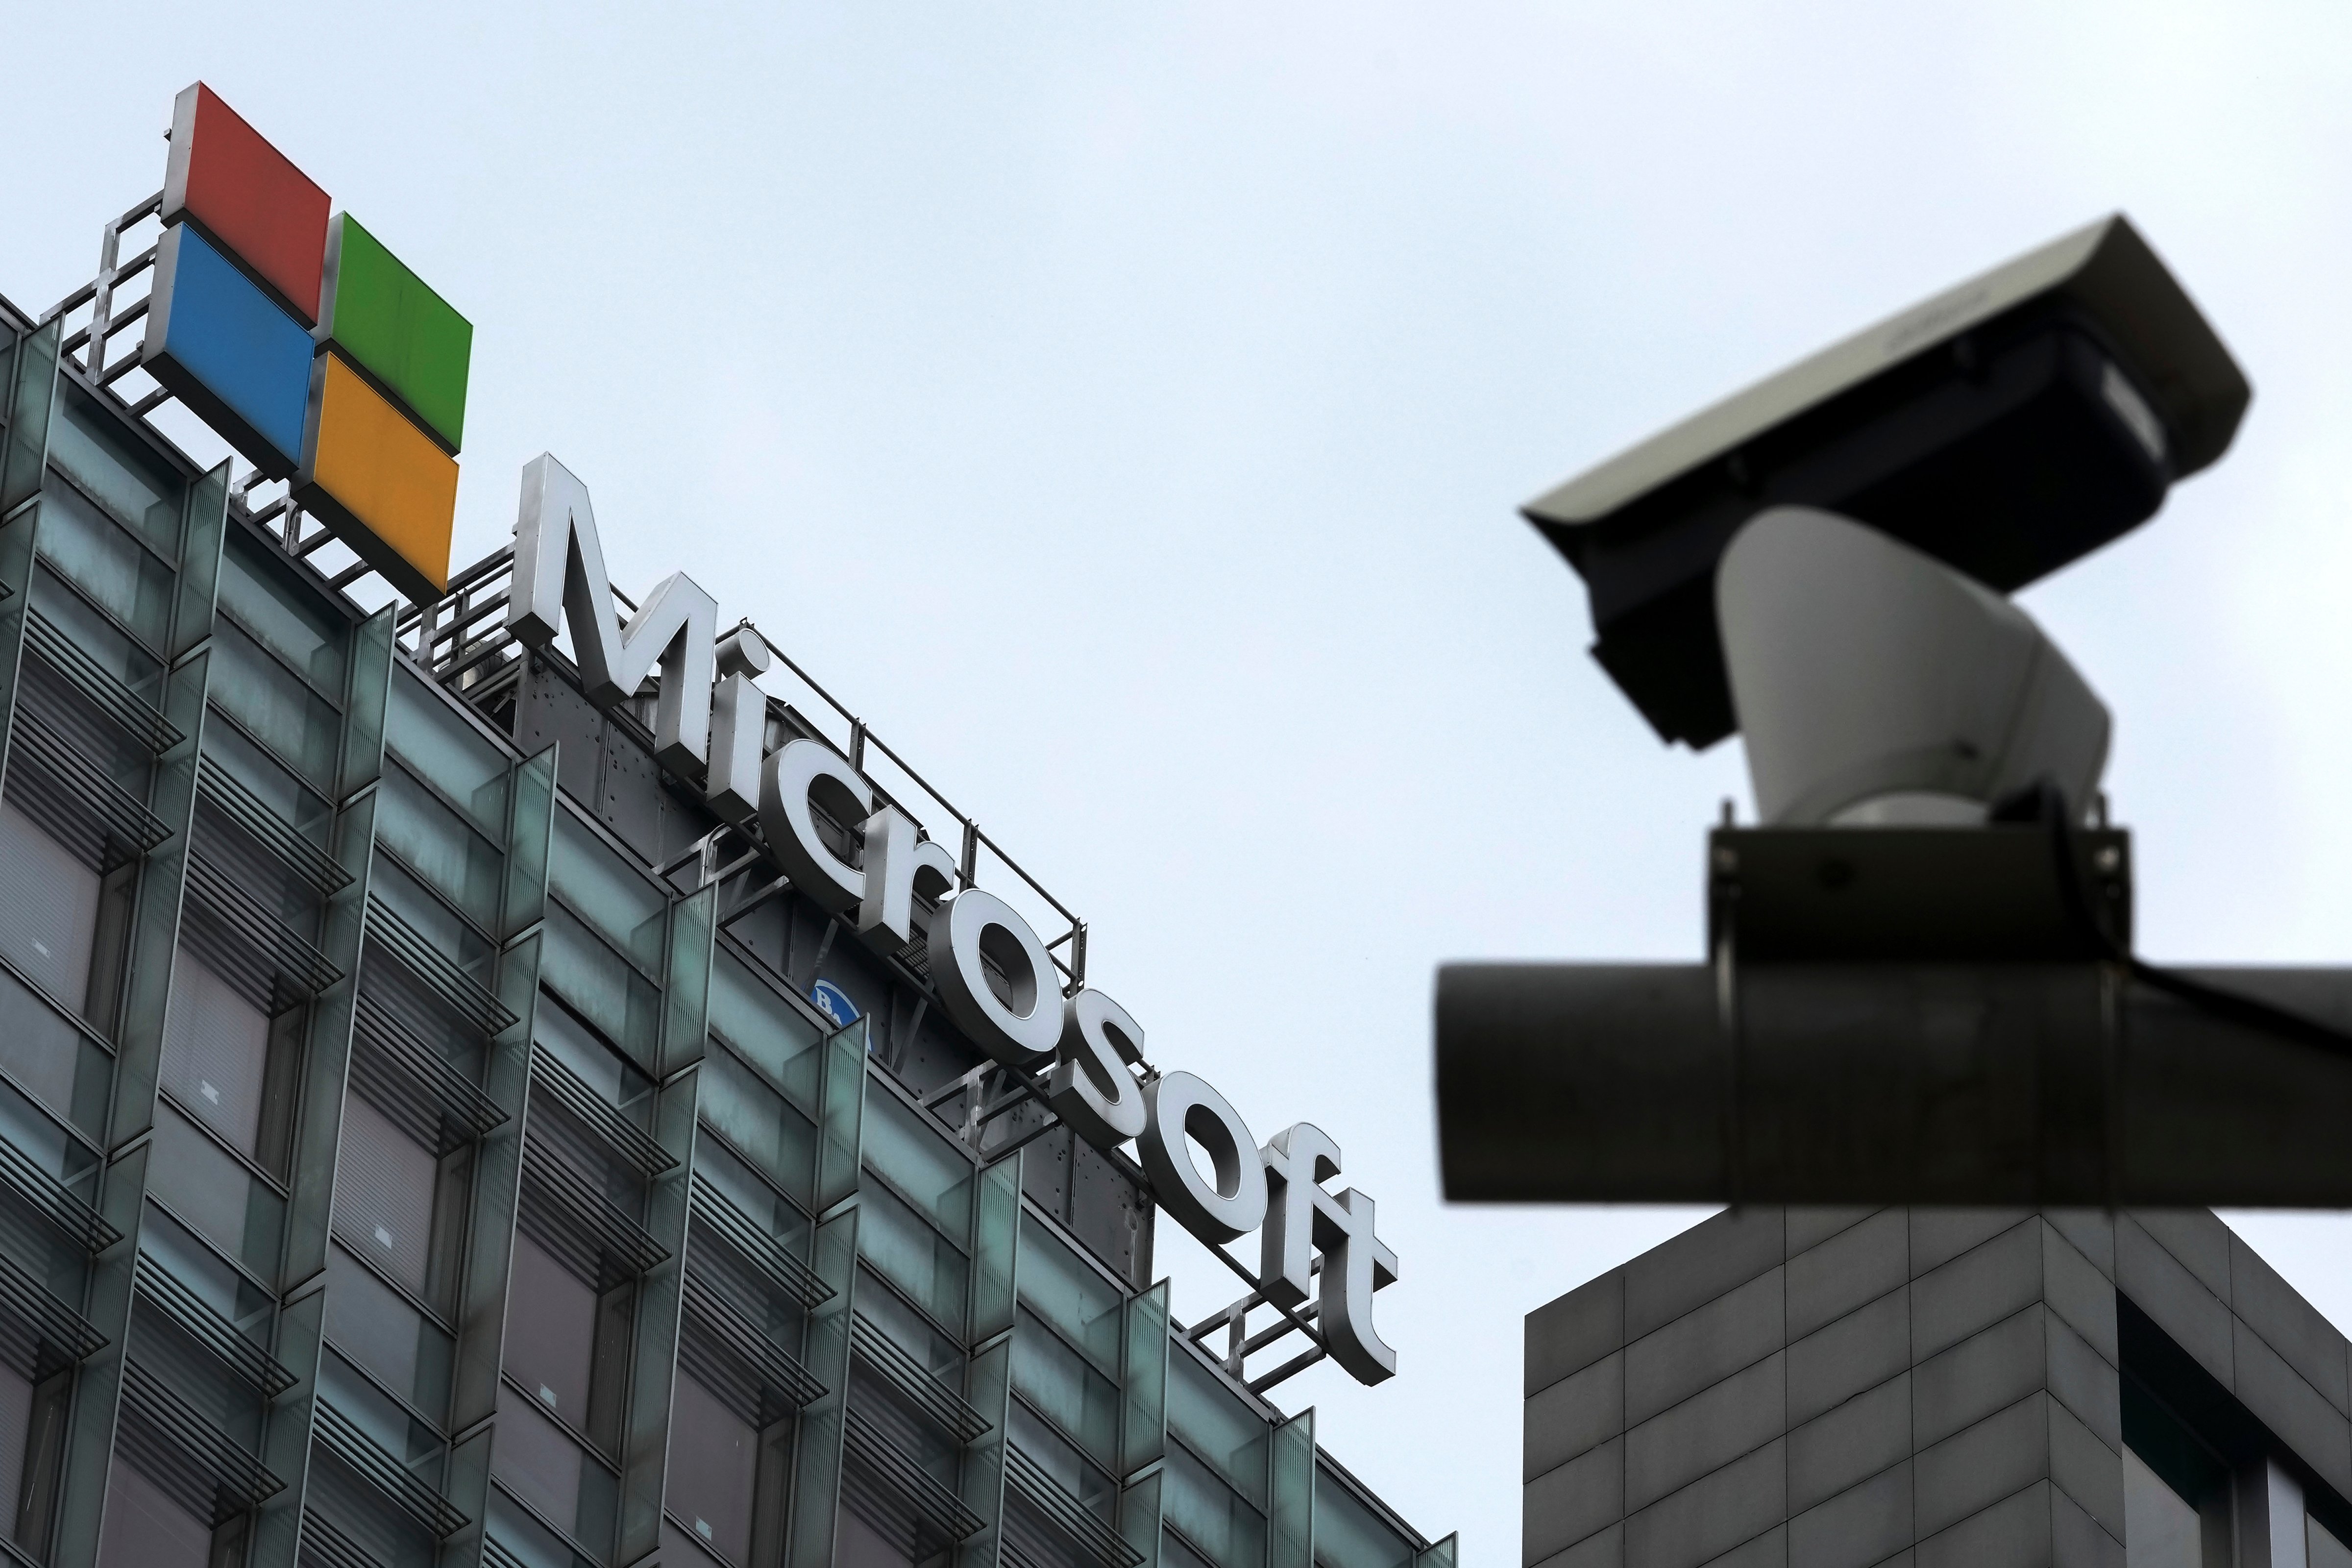 A security surveillance camera near the Microsoft office building in Beijing. (Andy Wong—AP Photo)